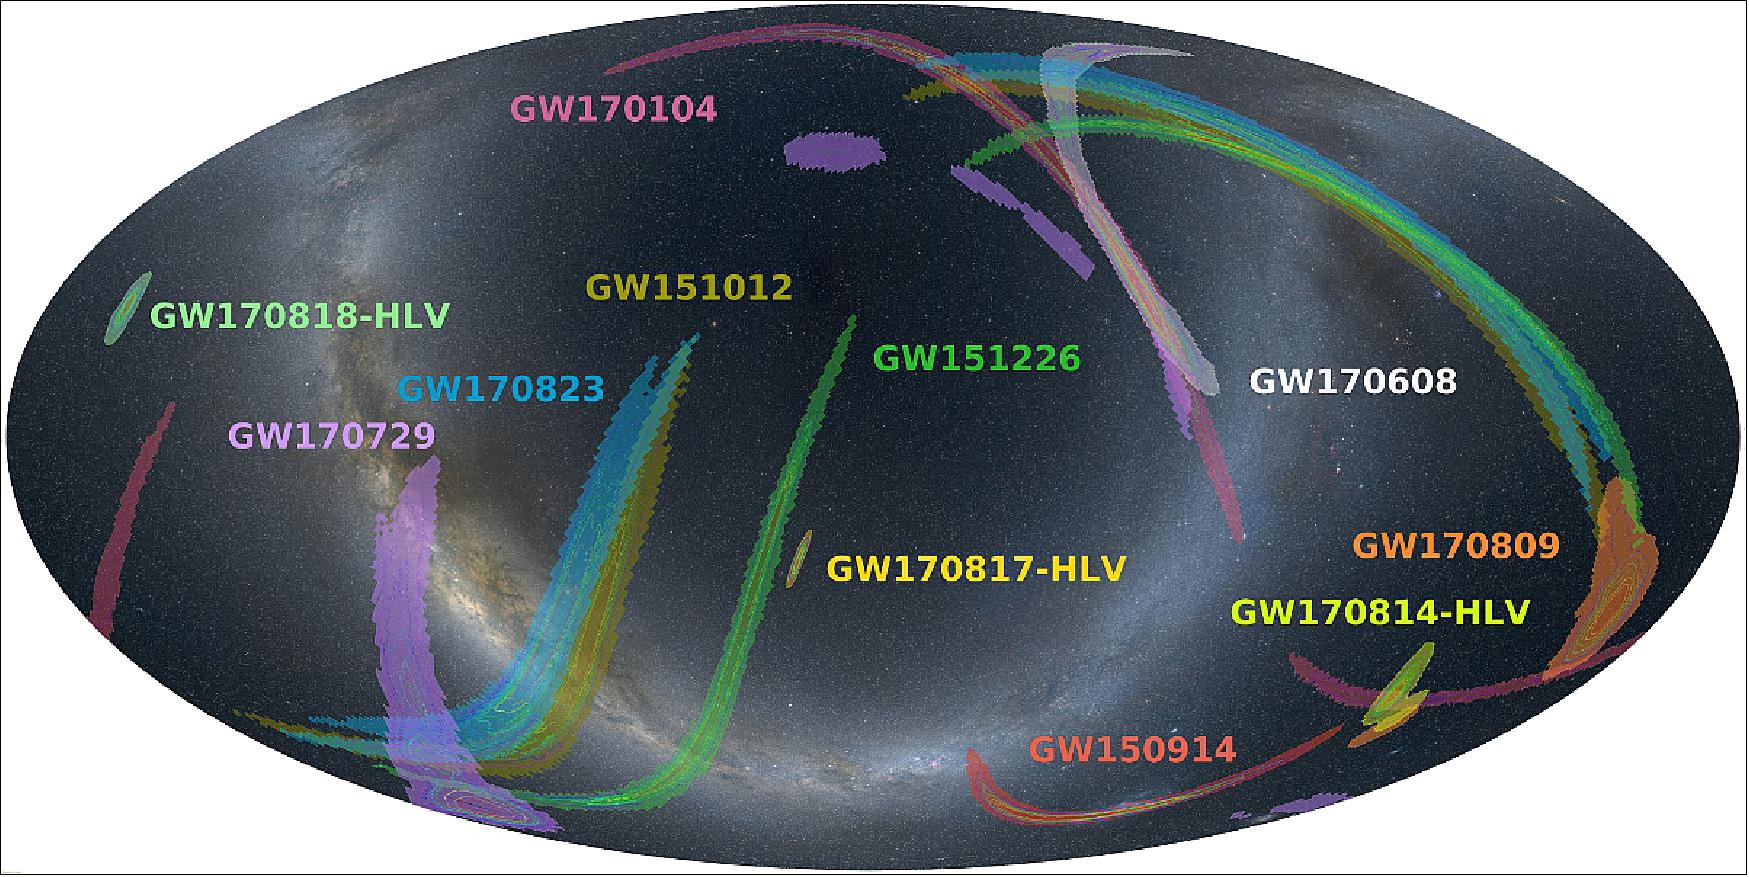 Figure 16: This illustration shows the localizations of the various gravitational-wave detections in the sky. The triple detections are labelled as HLV from the initials of the three interferometers (LIGO-Hanford, LIGO-Livingston and Virgo) that observed the signals. The reduced areas of the triple events demonstrate the capabilities of the global gravitational-wave network (image credit: Virgo LIGO Collaboration)